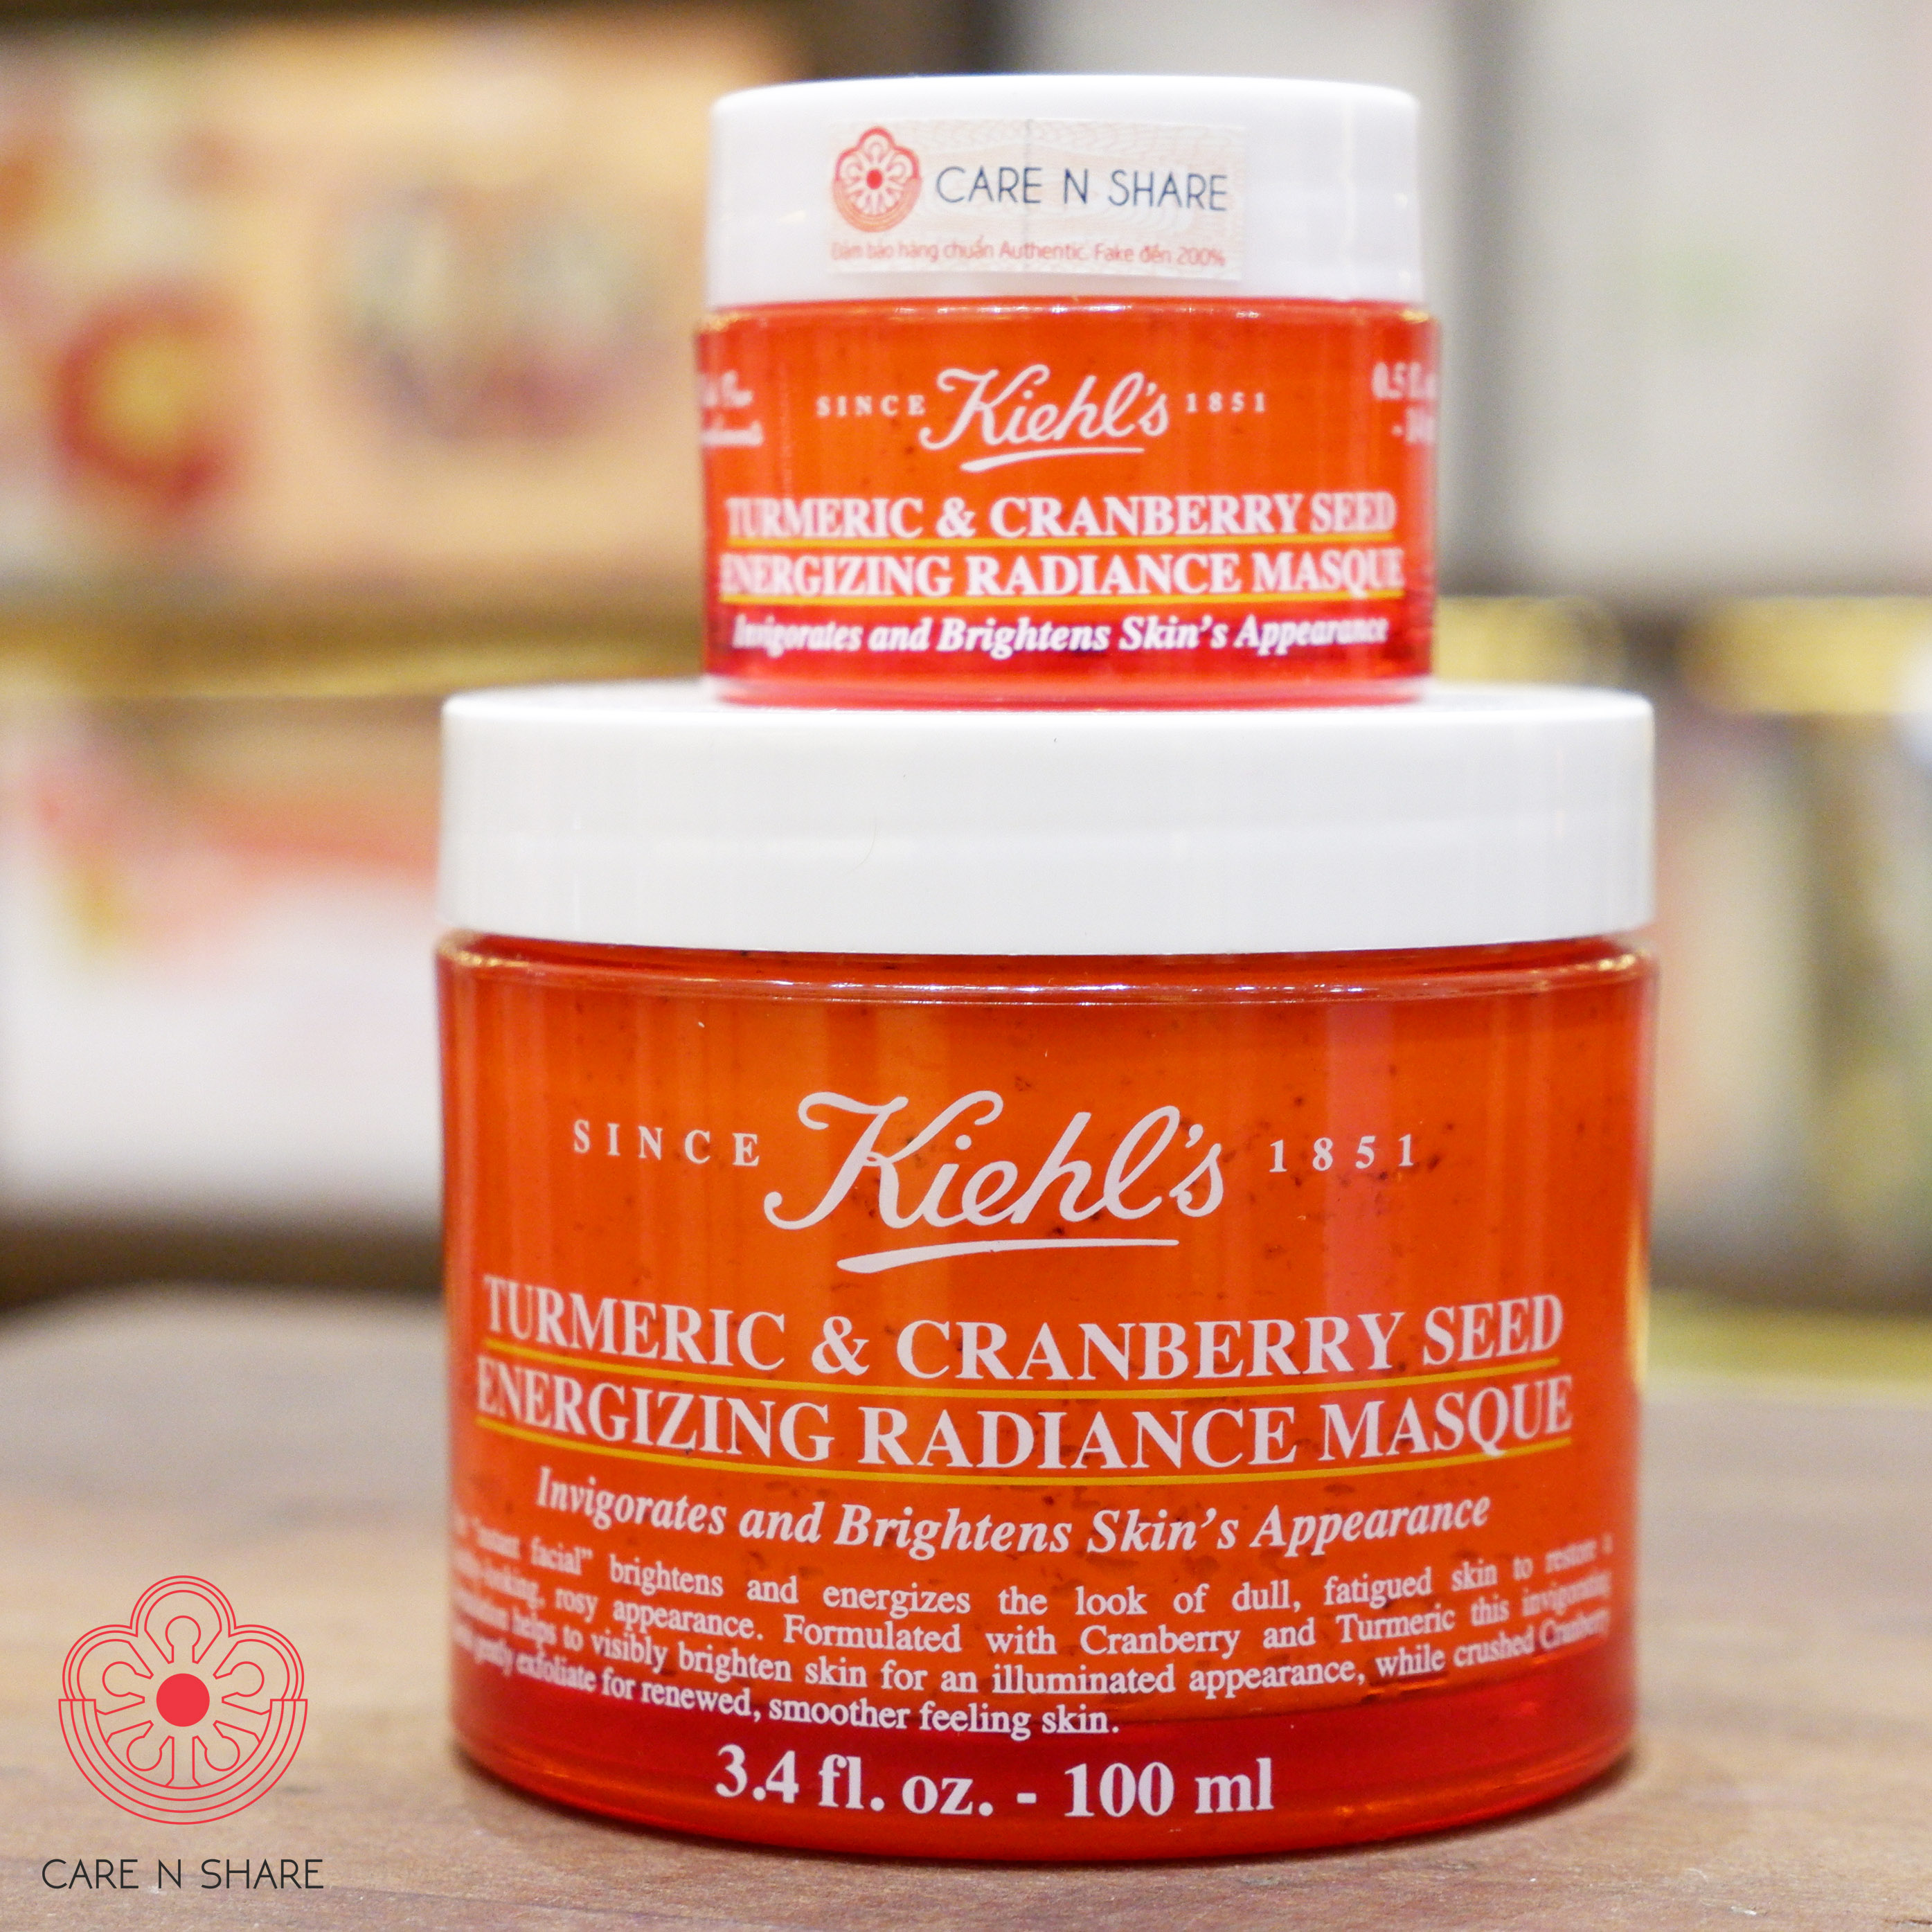 Mặt Nạ Nghệ Việt Quất Tumeric & Cranberry Seed Energizing Radiance Masque